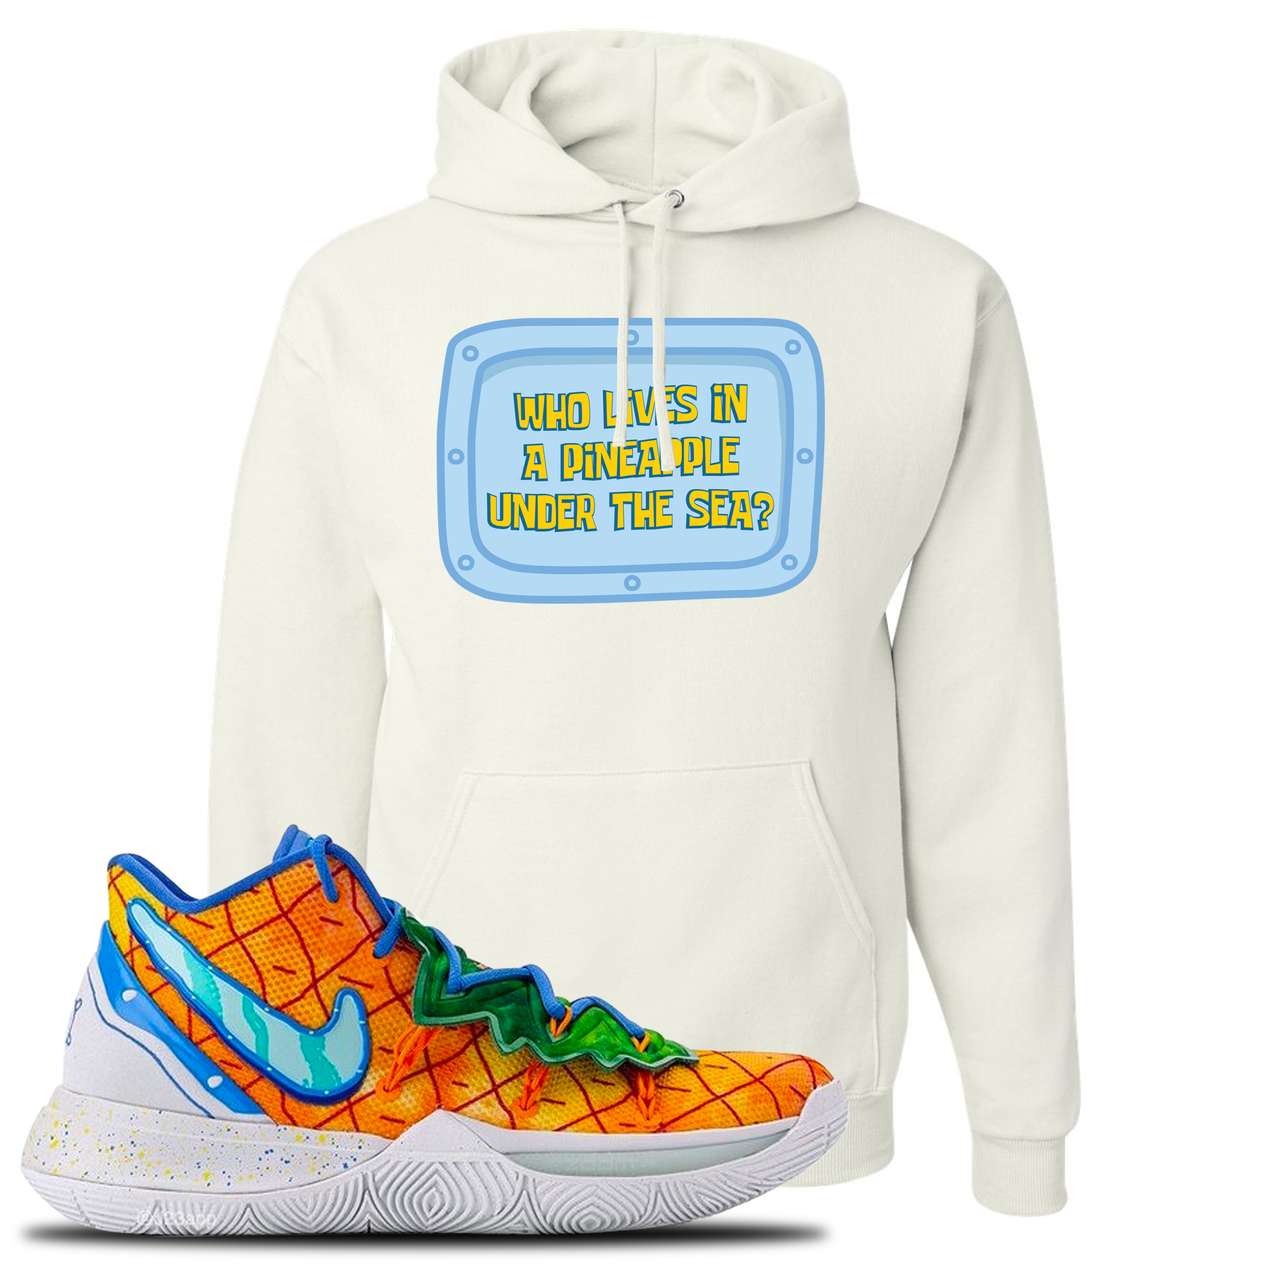 Kyrie 5 Pineapple House Who Lives in a Pineapple Under the Sea? White Sneaker Hook Up Pullover Hoodie